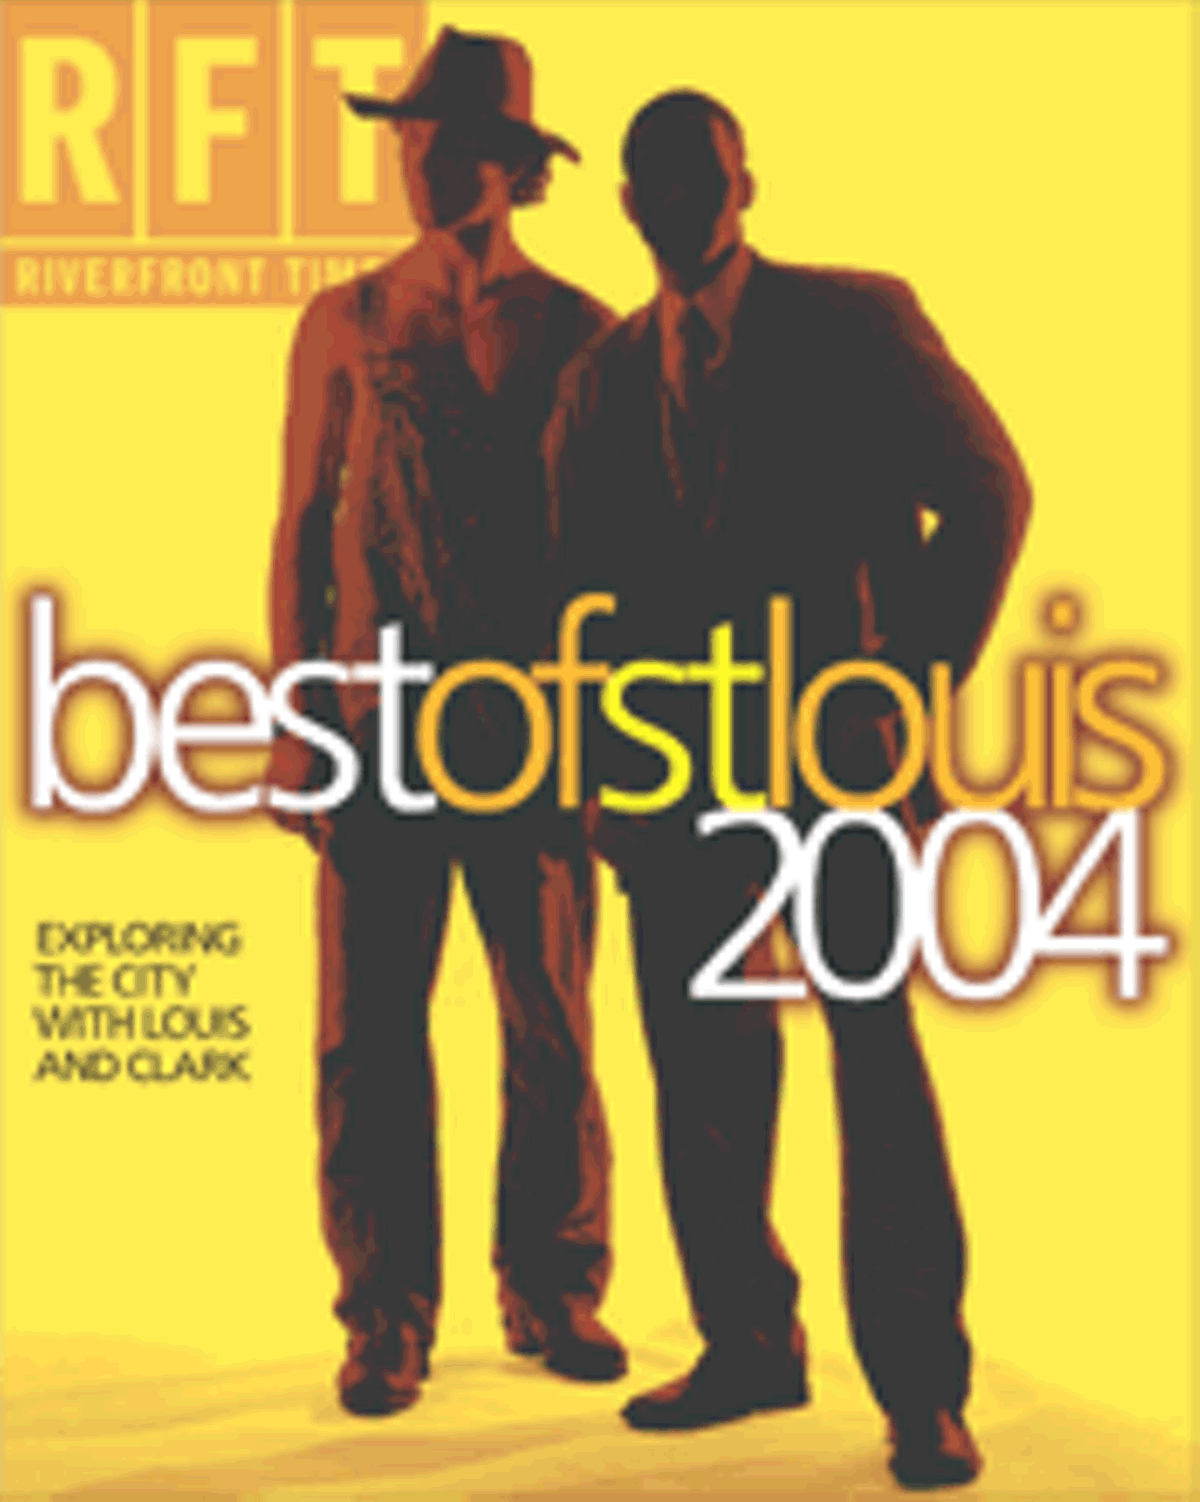 Best of St. Louis 2004 Issue Cover